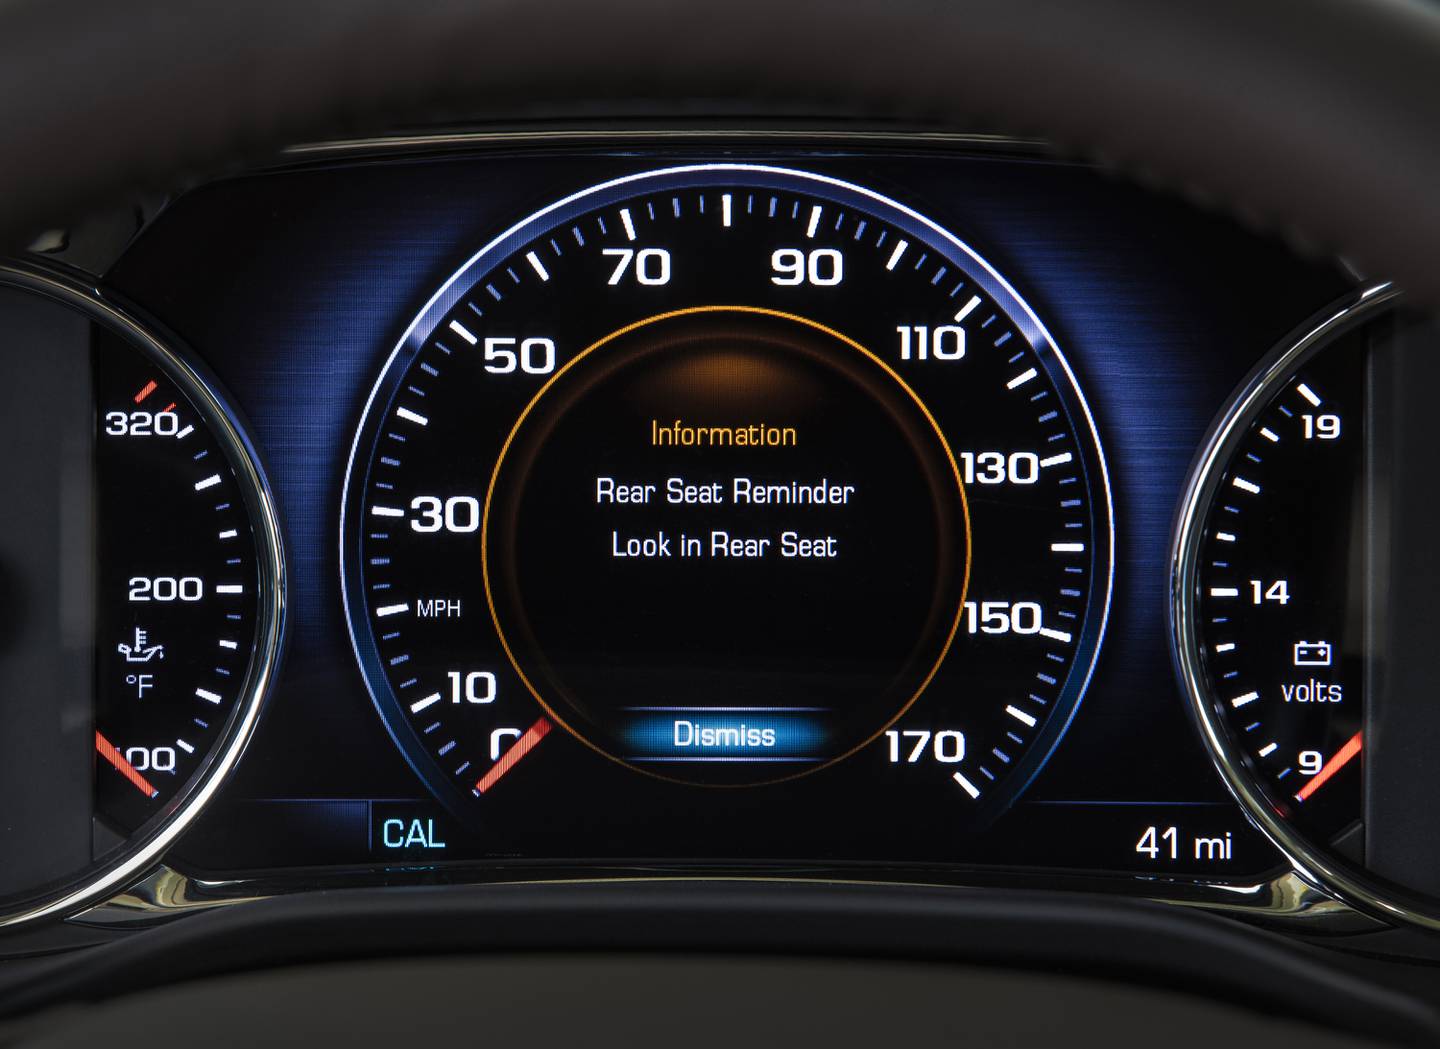 A rear-seat reminder alert on the dashboard of the GMC Acadia 2018